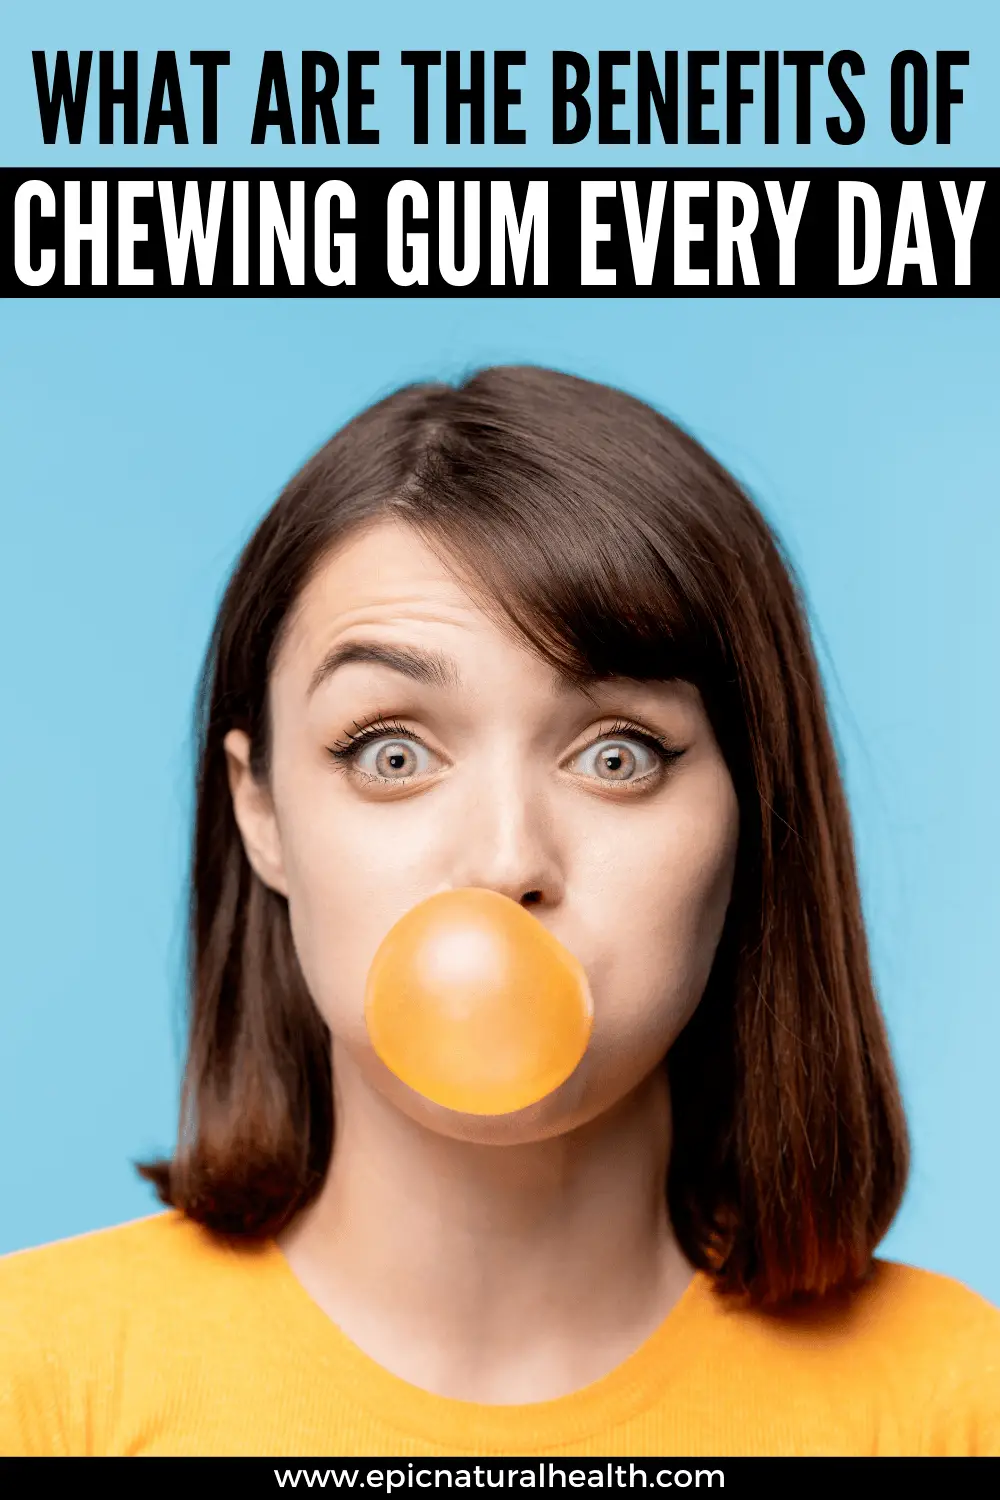 What are the benefits of chewing gum everyday